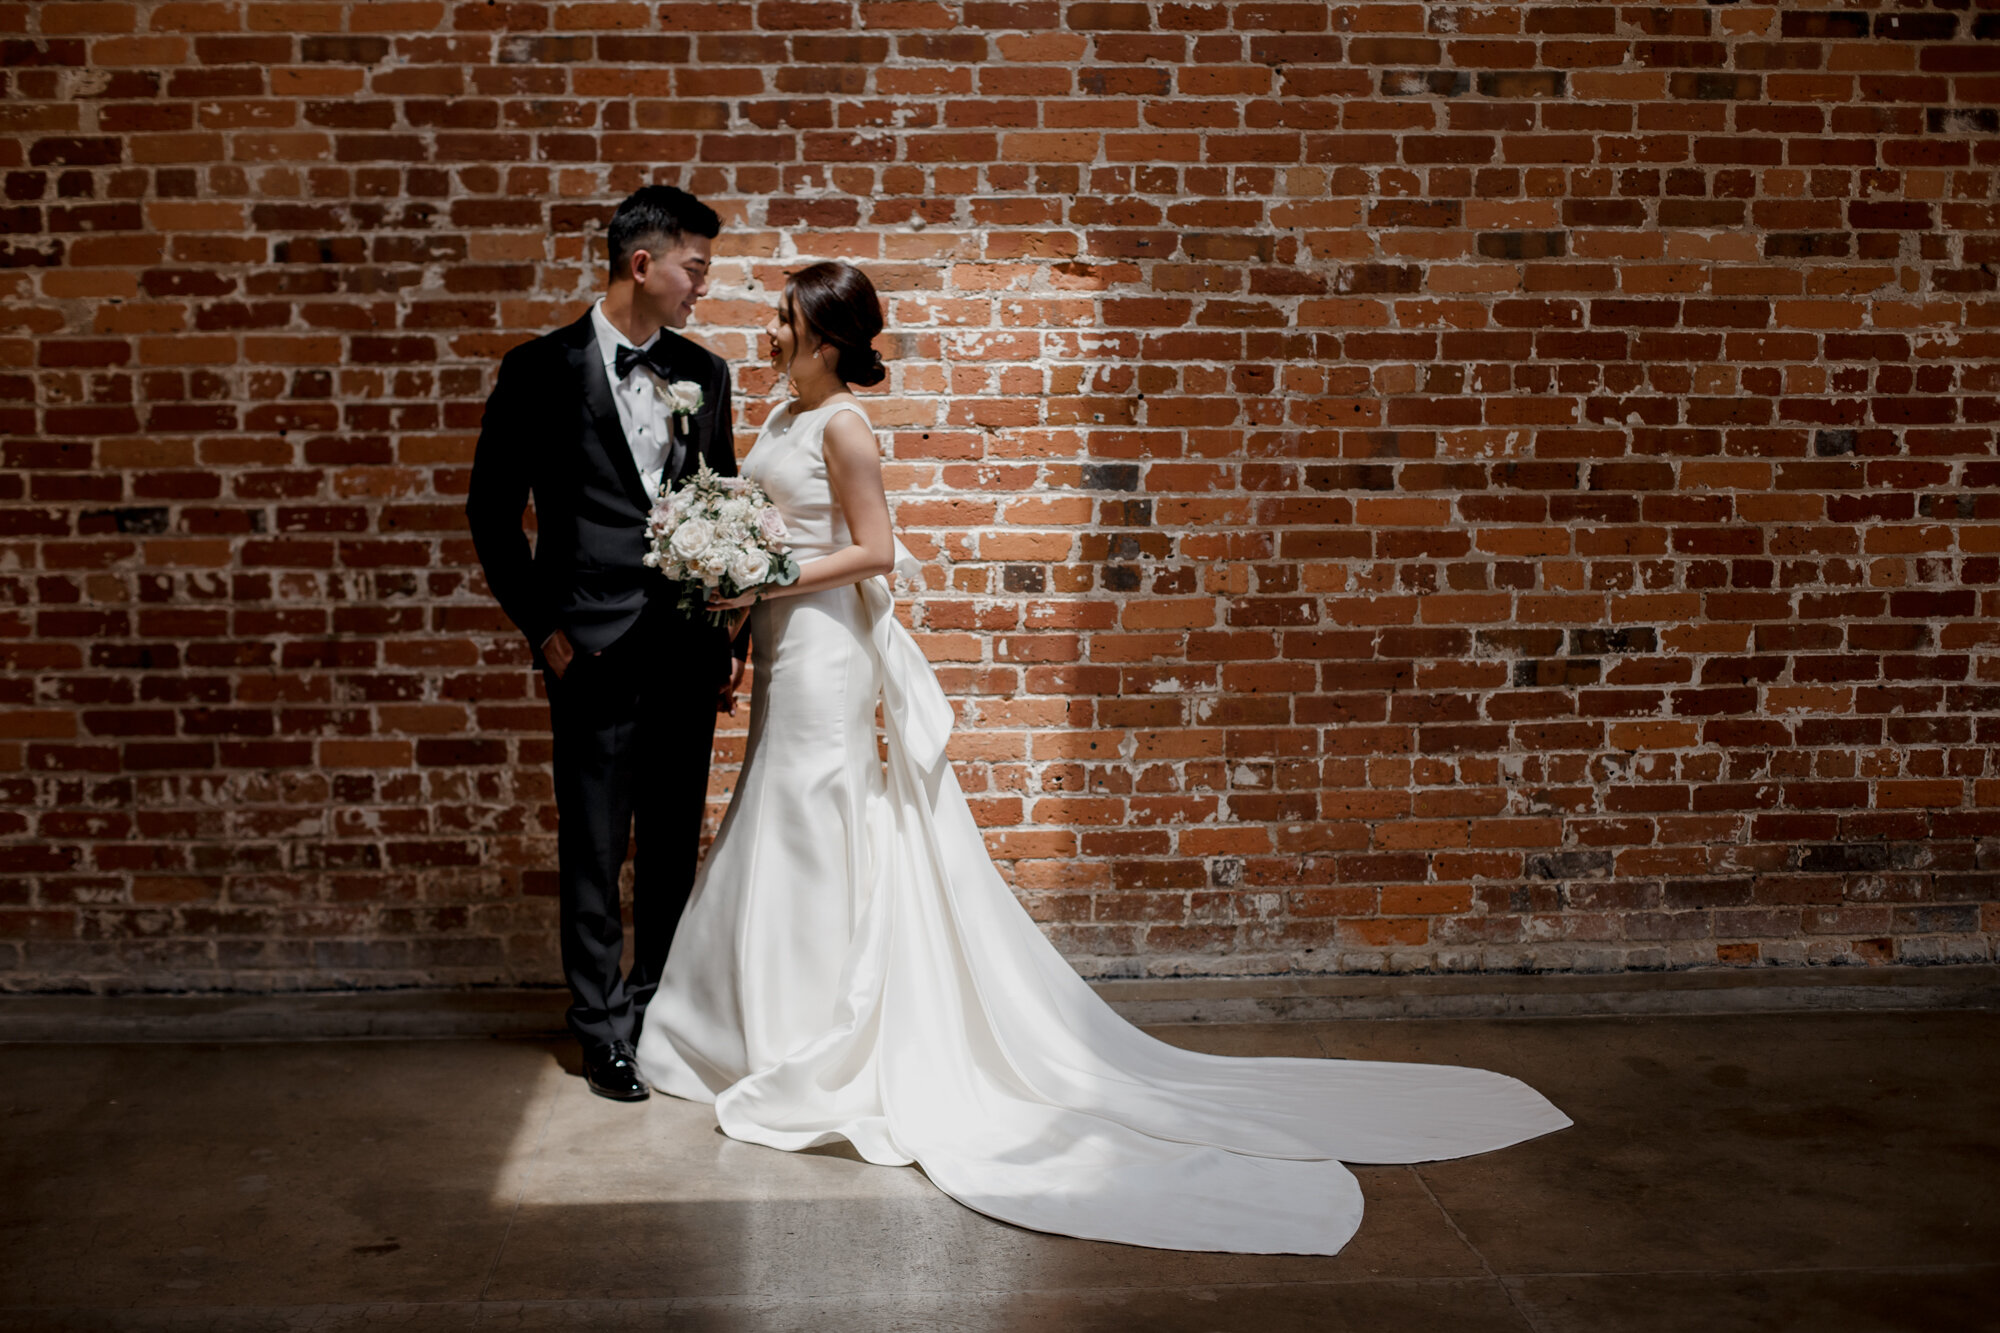 Bride and groom by the brick wall in the sunlight. Urban Elegant East Asian Wedding at Ronin 2